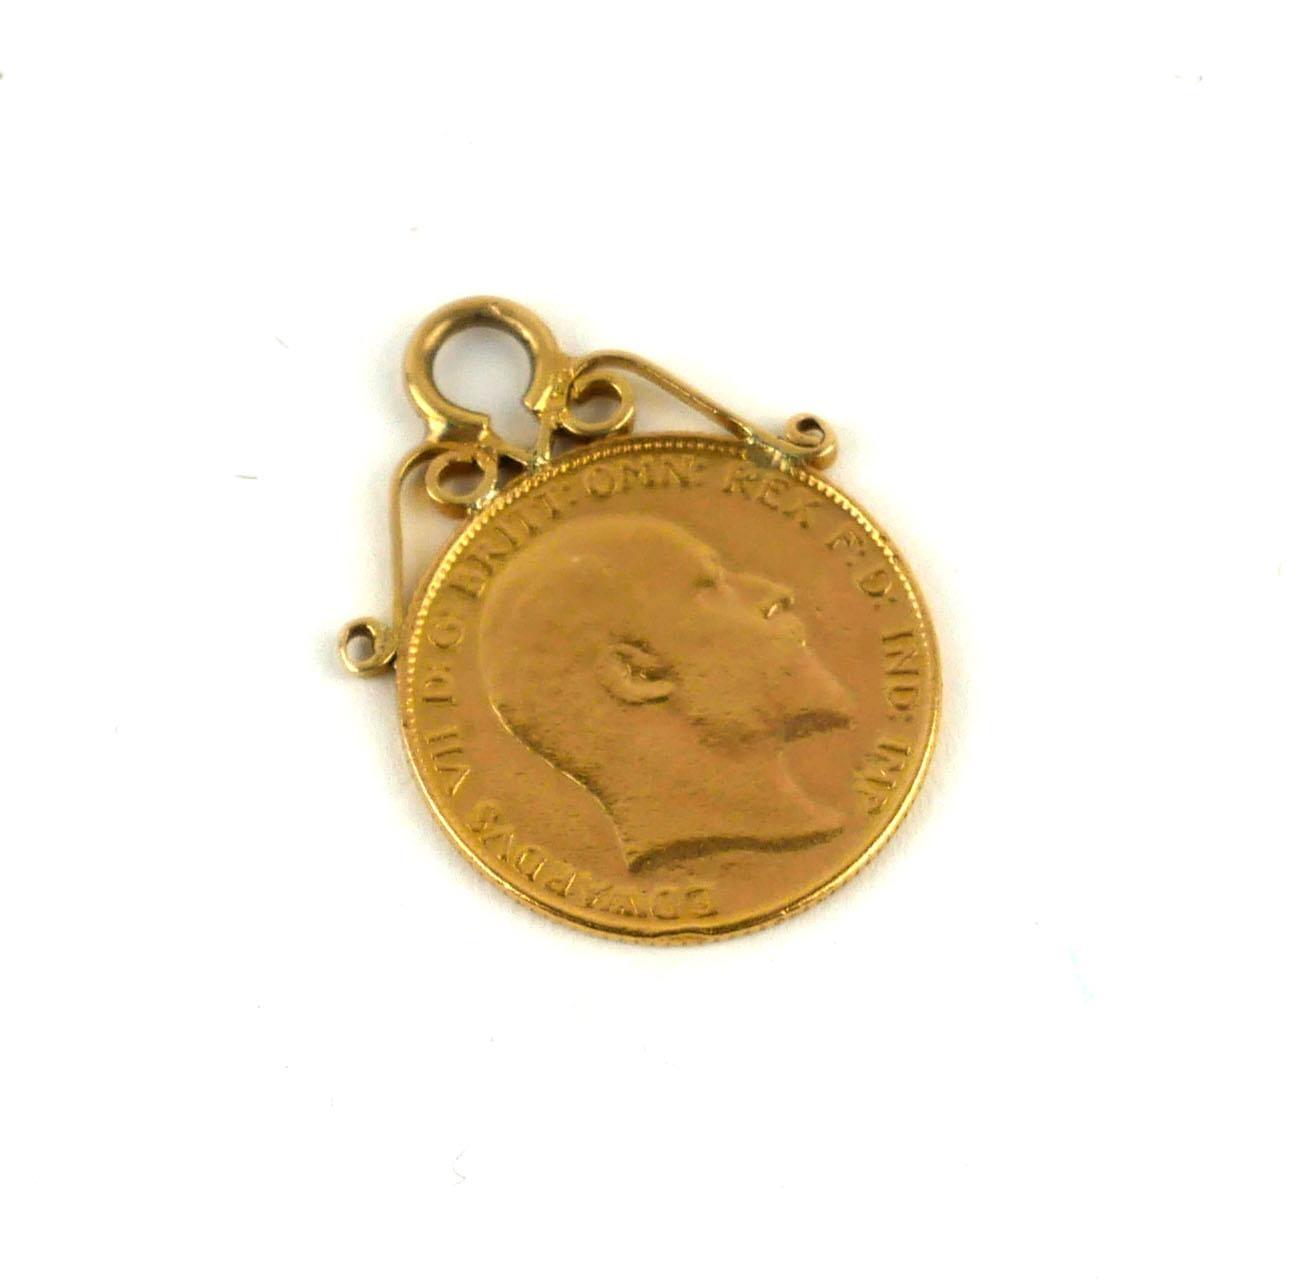 AN EDWARDIAN 22CT GOLD HALF SOVEREIGN COIN, DATED 1908 George and Dragon verso, with 9ct gold - Image 2 of 2